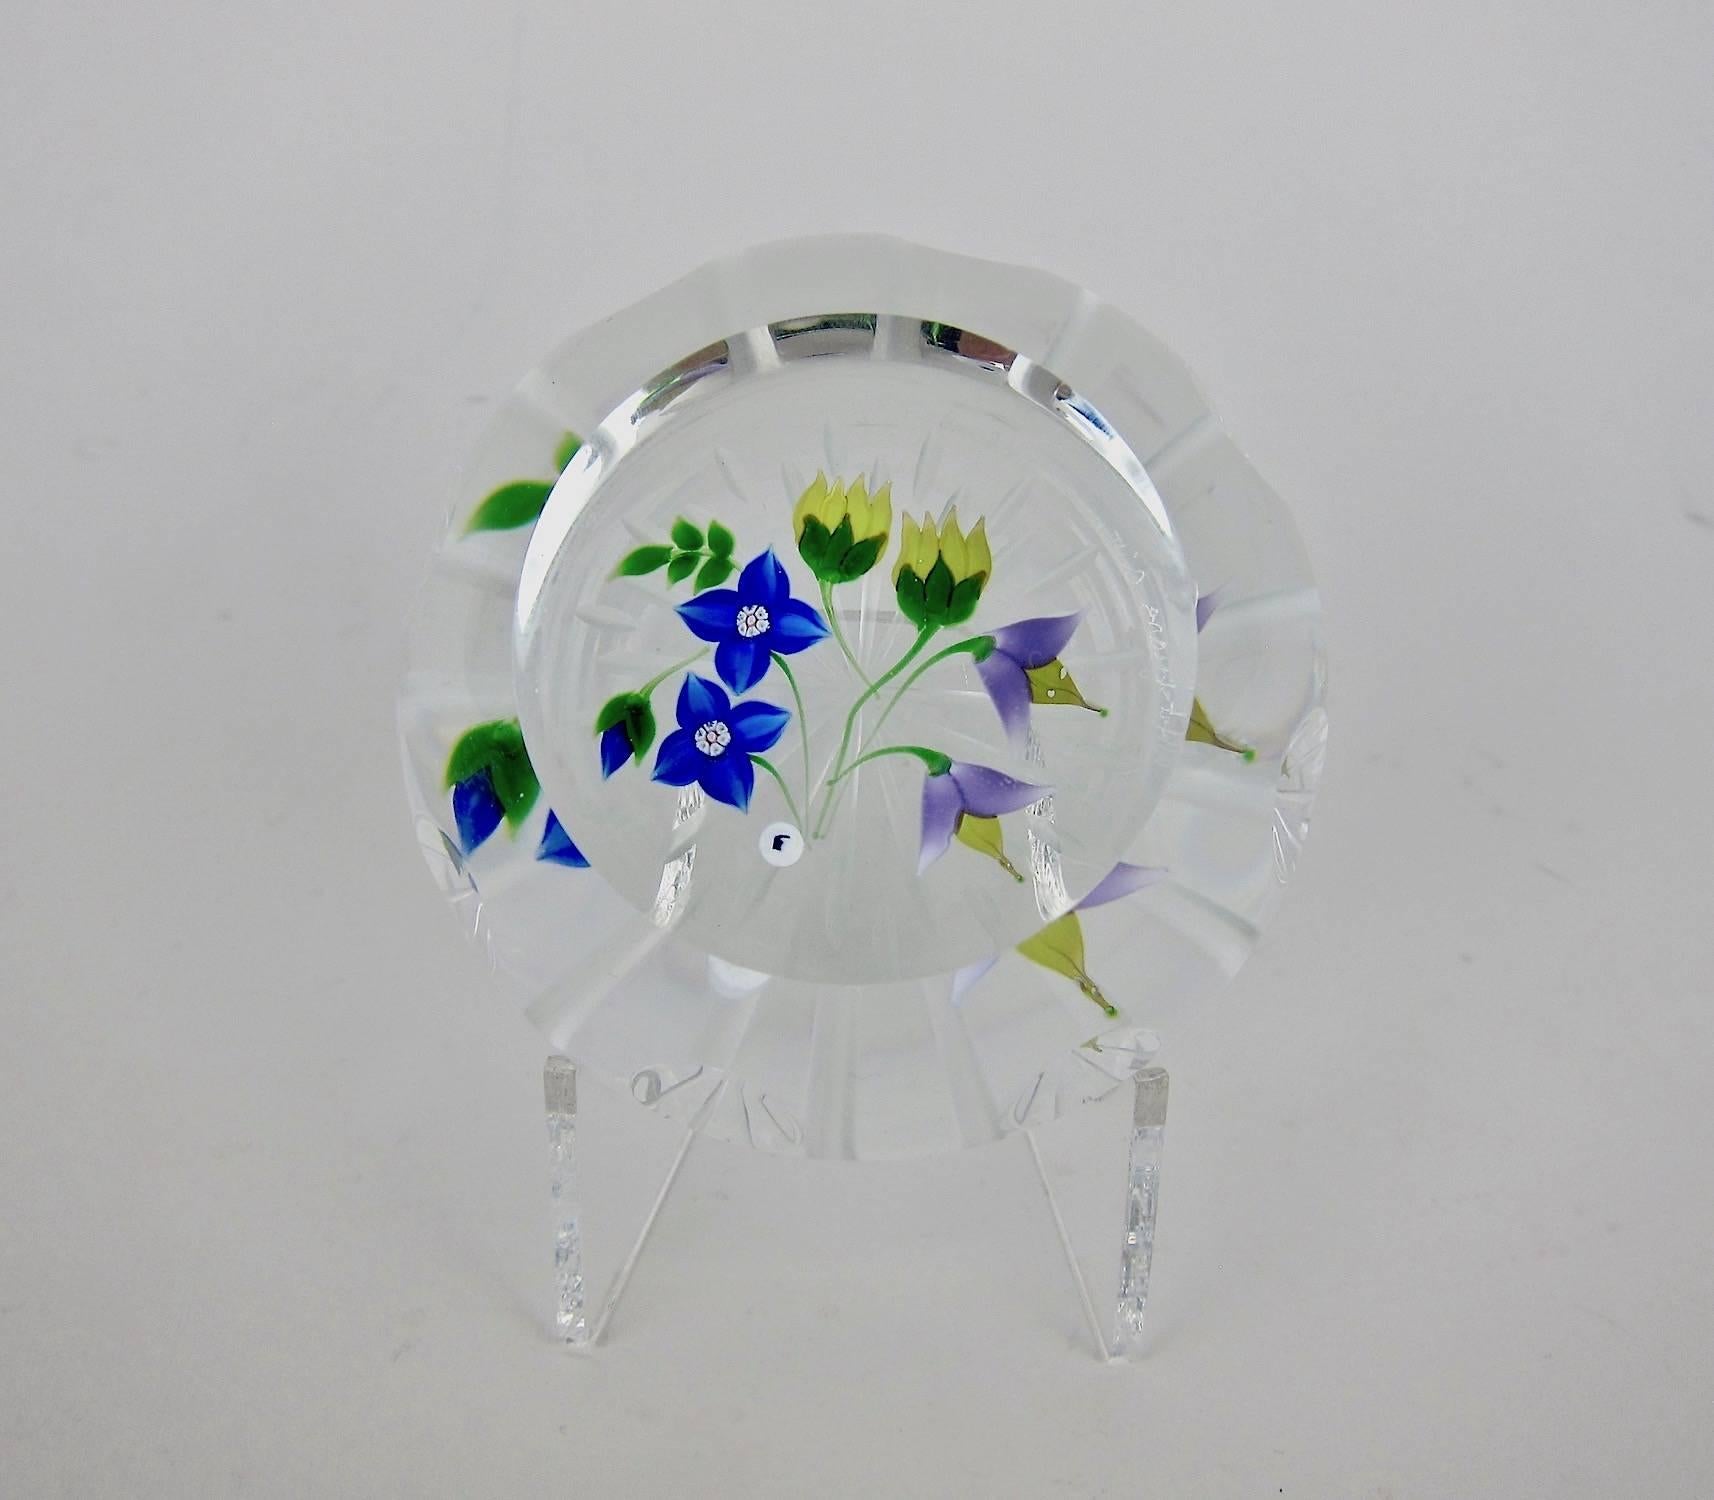 A handcrafted studio glass paperweight from Whitefriars Caithness of Scotland, designed by Allan Scott in 1986 in a limited edition of 250. The multi-faceted 